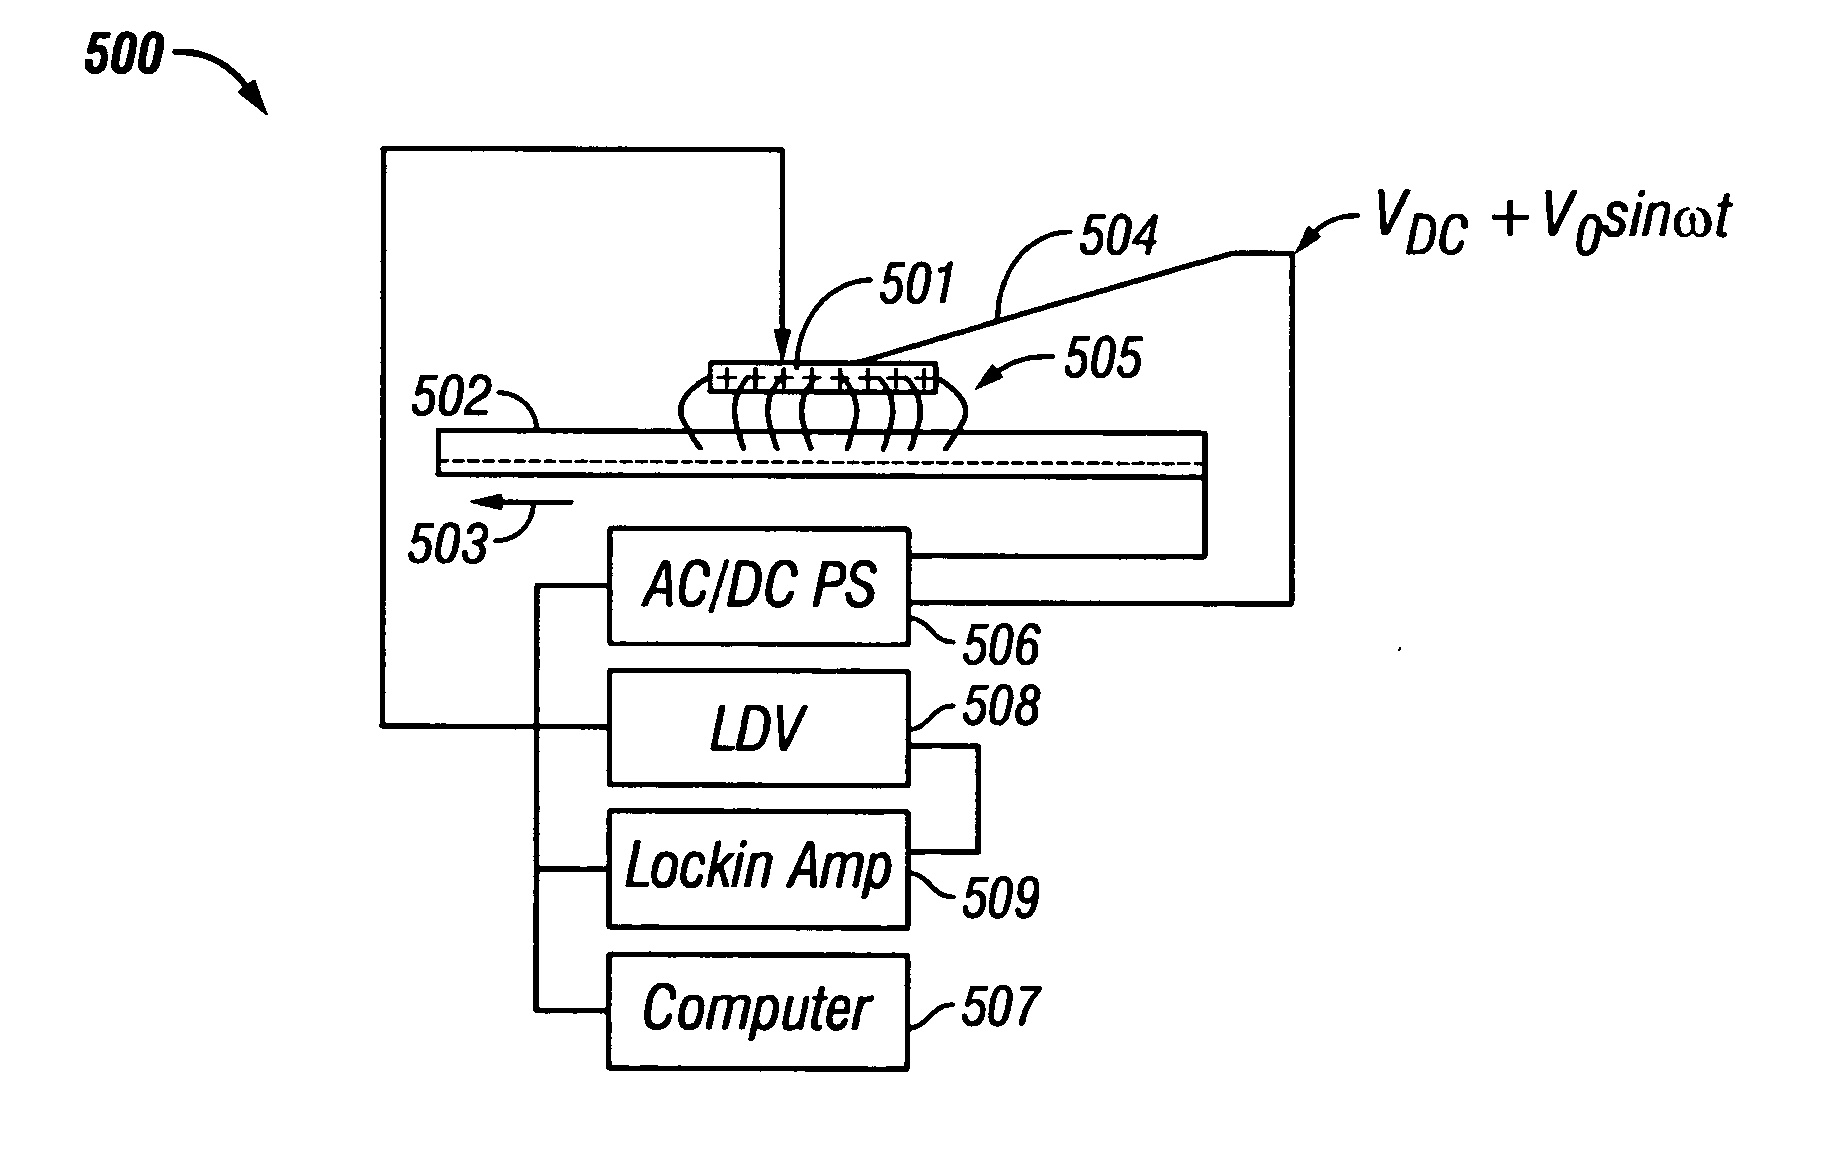 Magnetic recording disk drive with actively controlled electric potential at the head/disk interface for wear and durability control